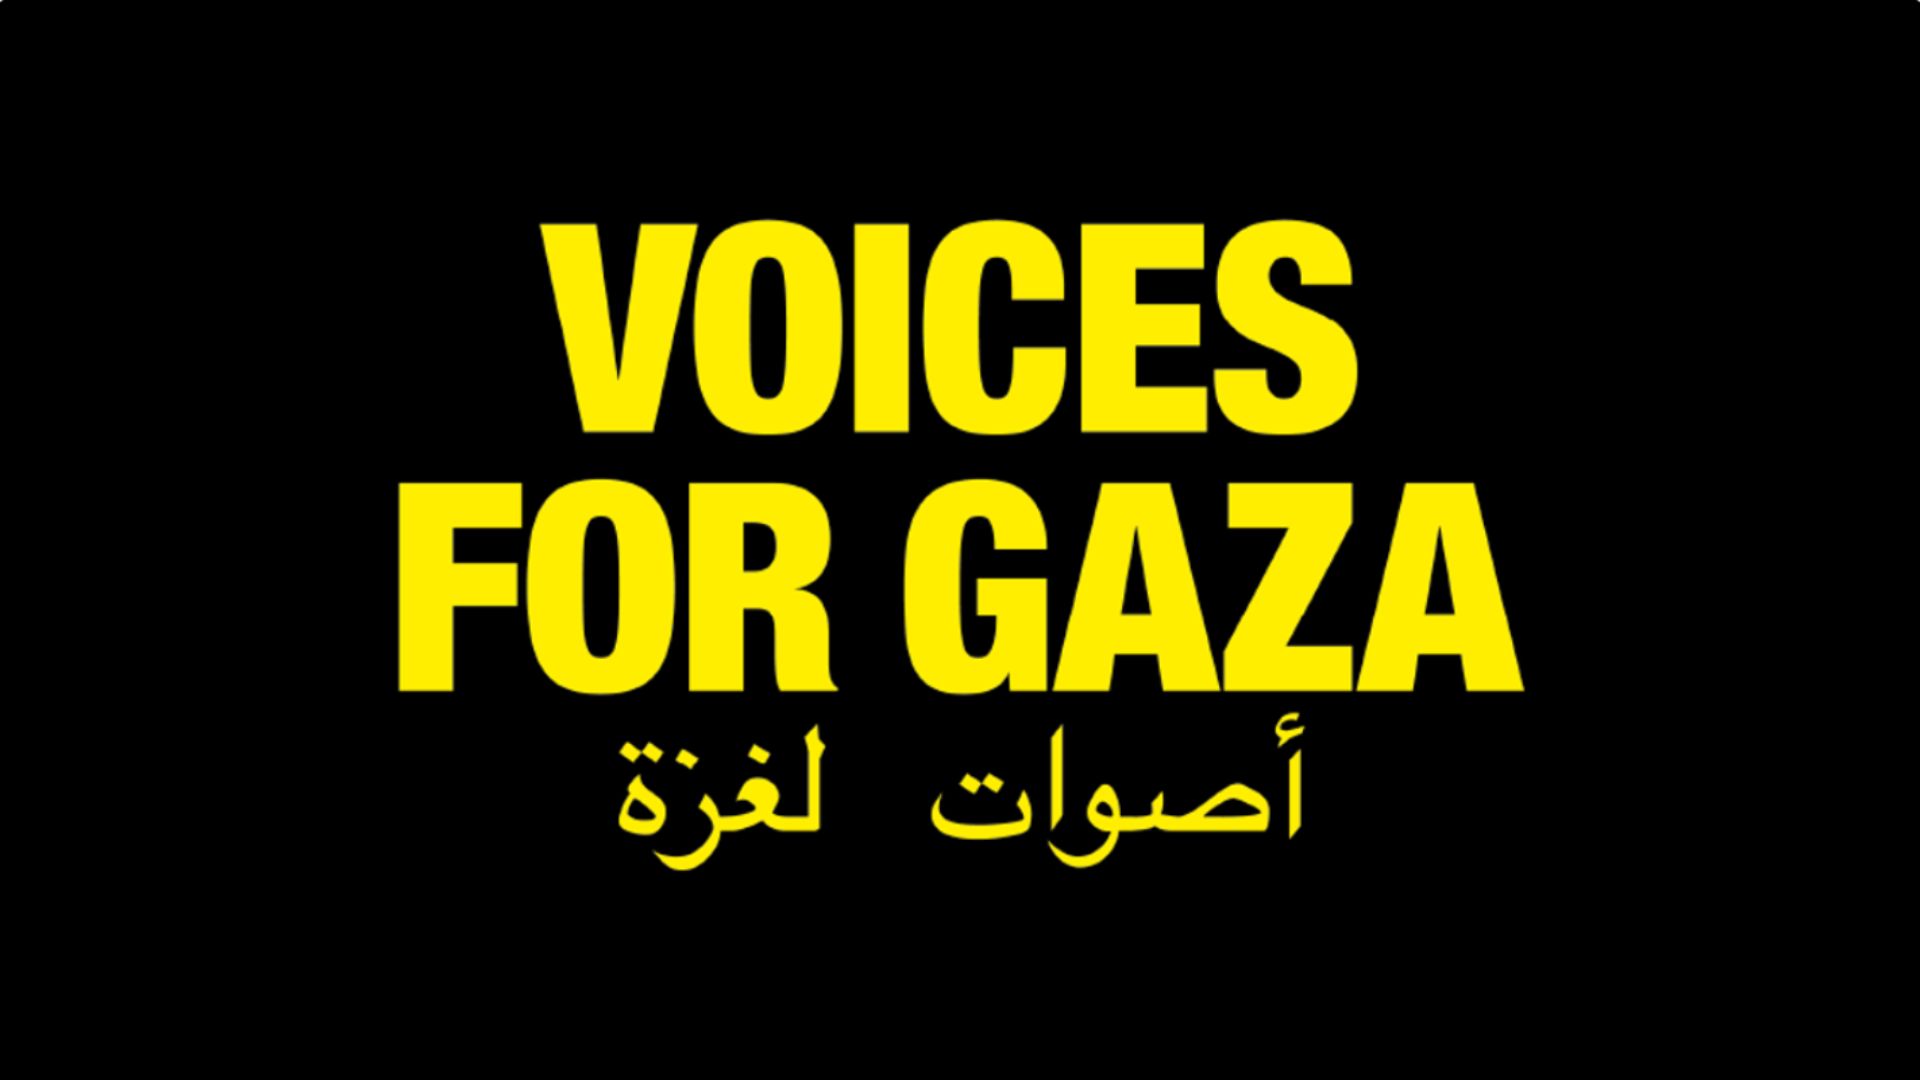 Voices for Gaza